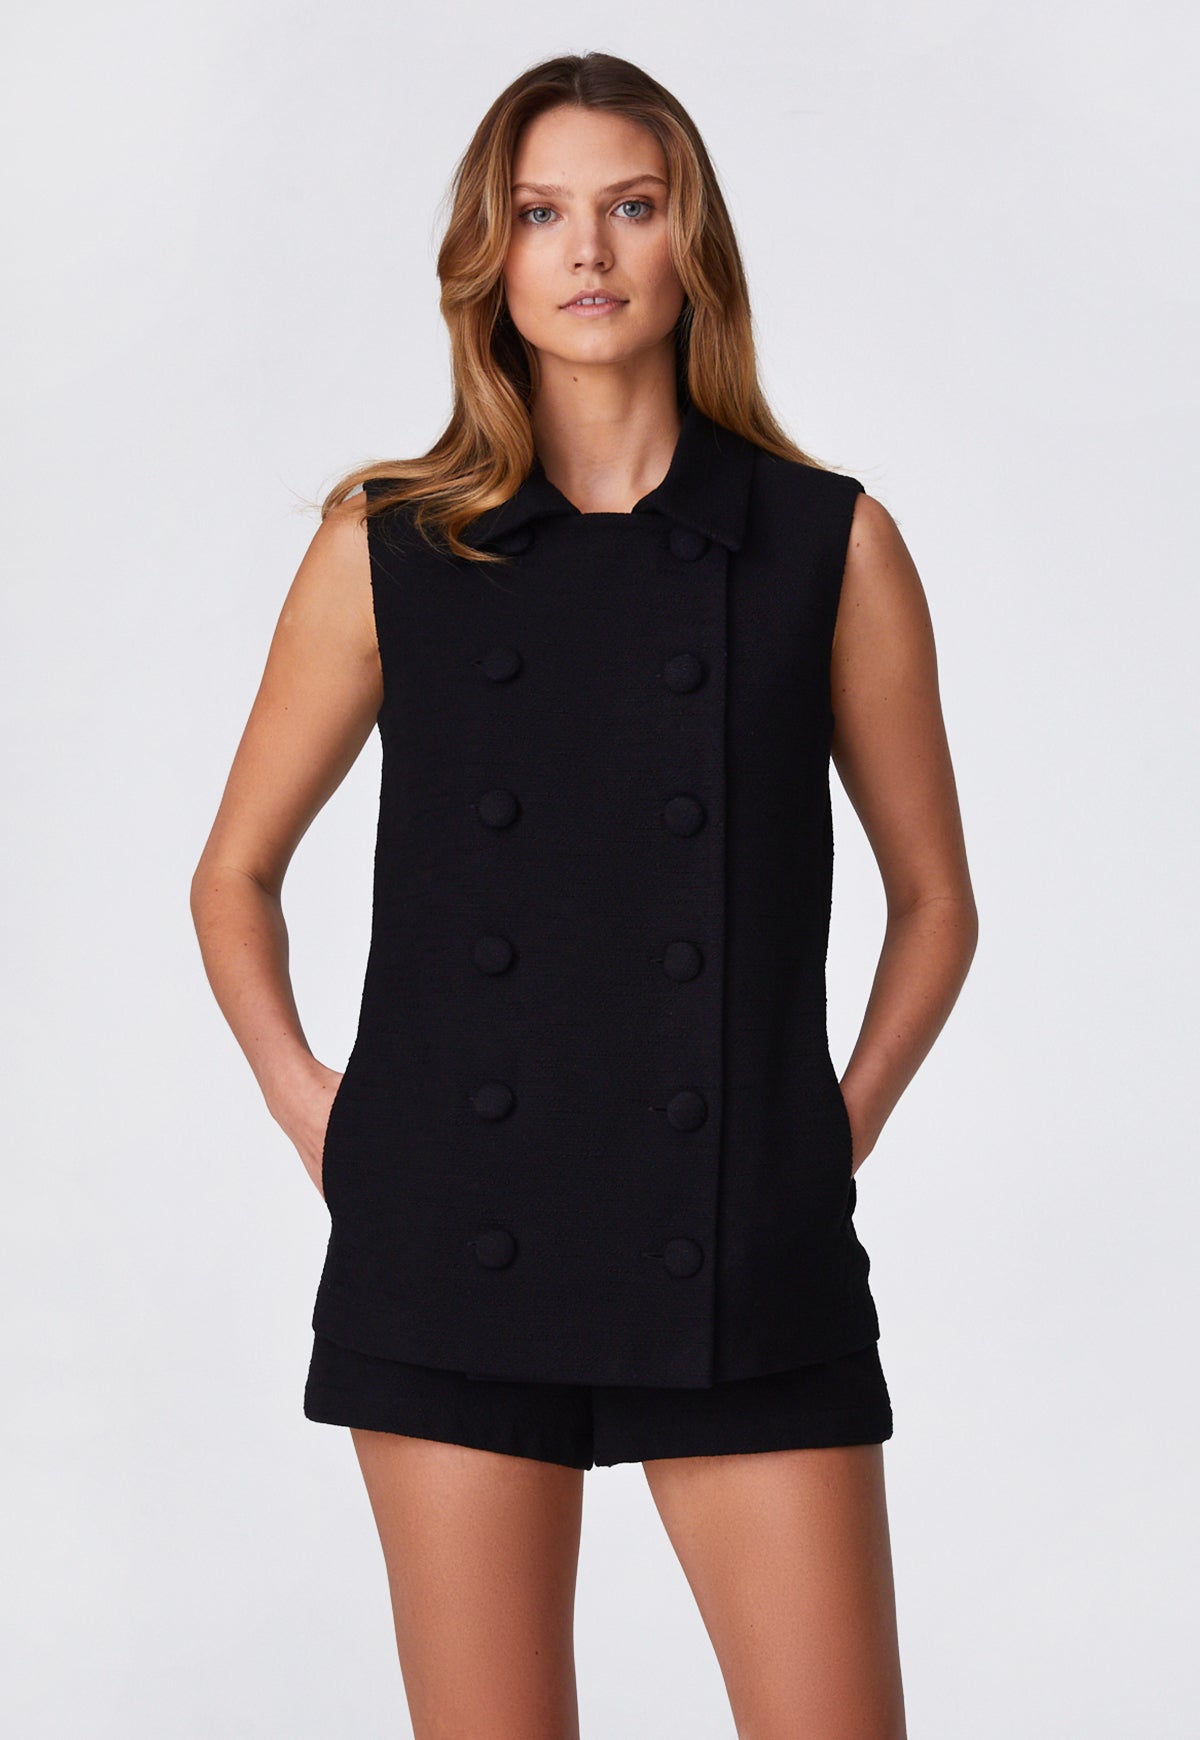 THE SHORT in BLACK TEXTURED COTTON